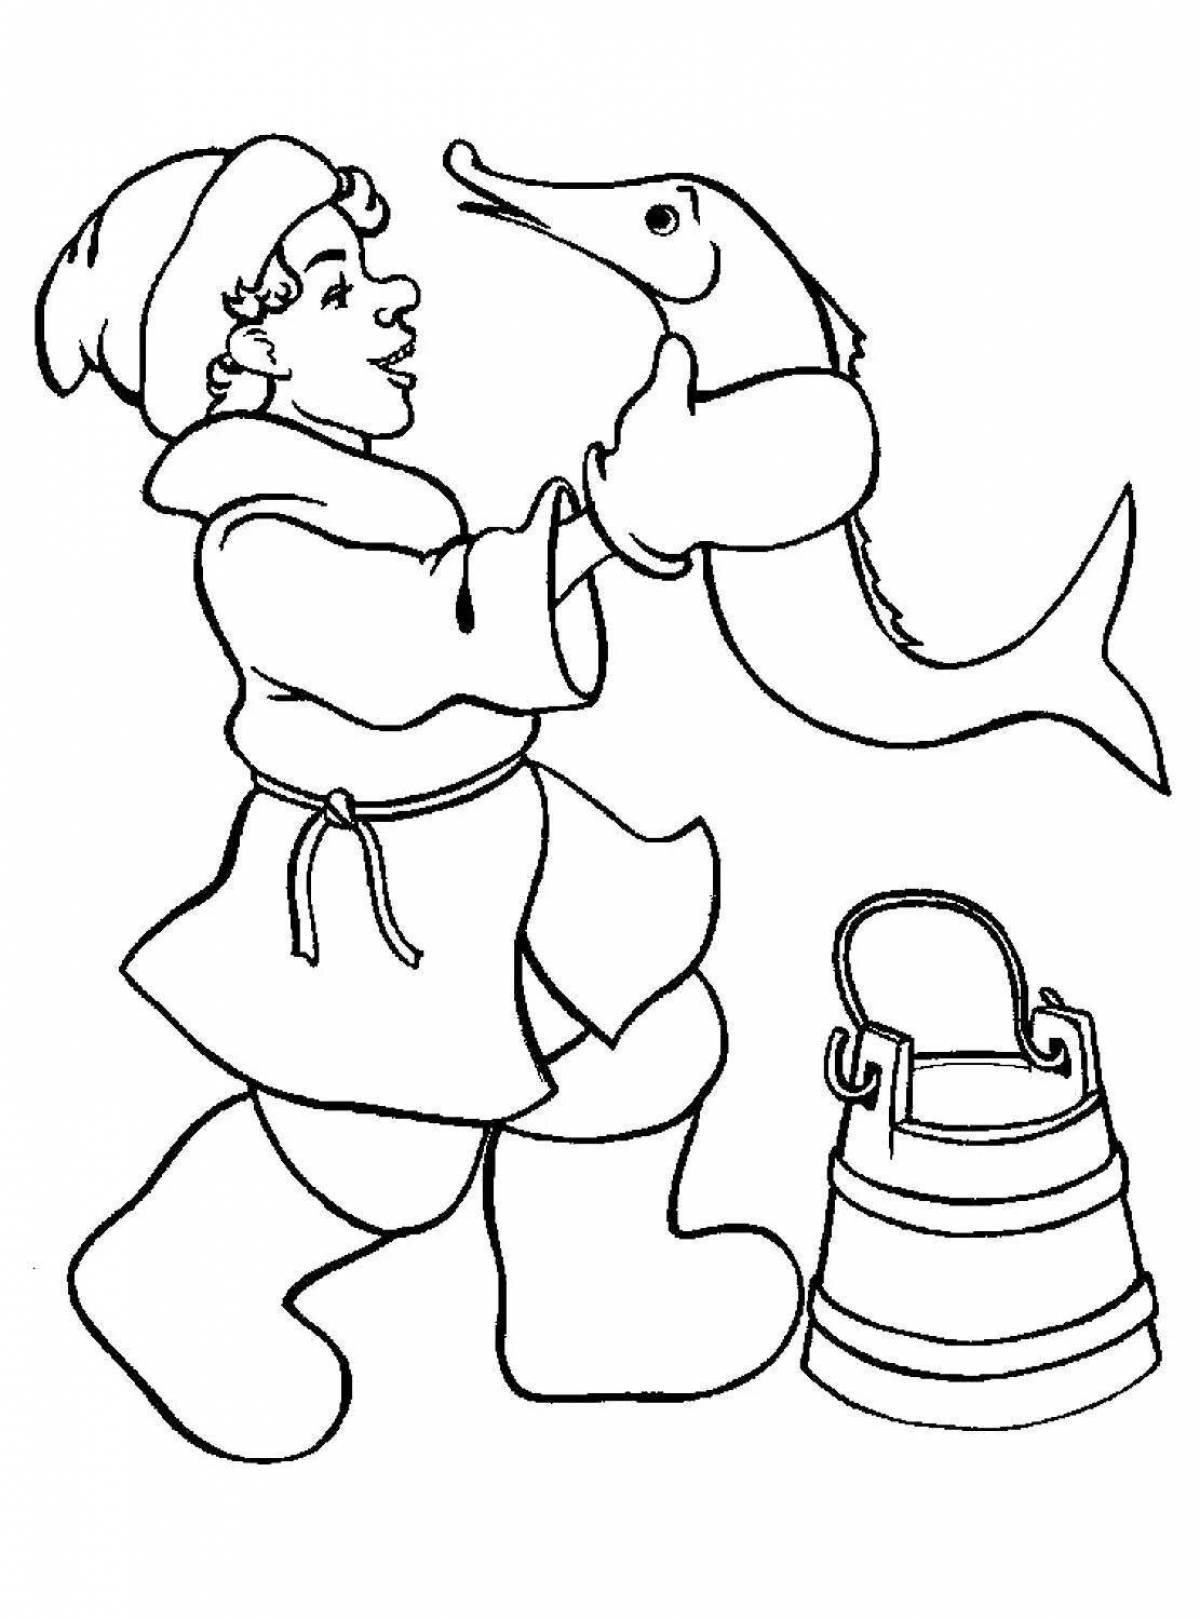 Coloring page wonderful pike and emela